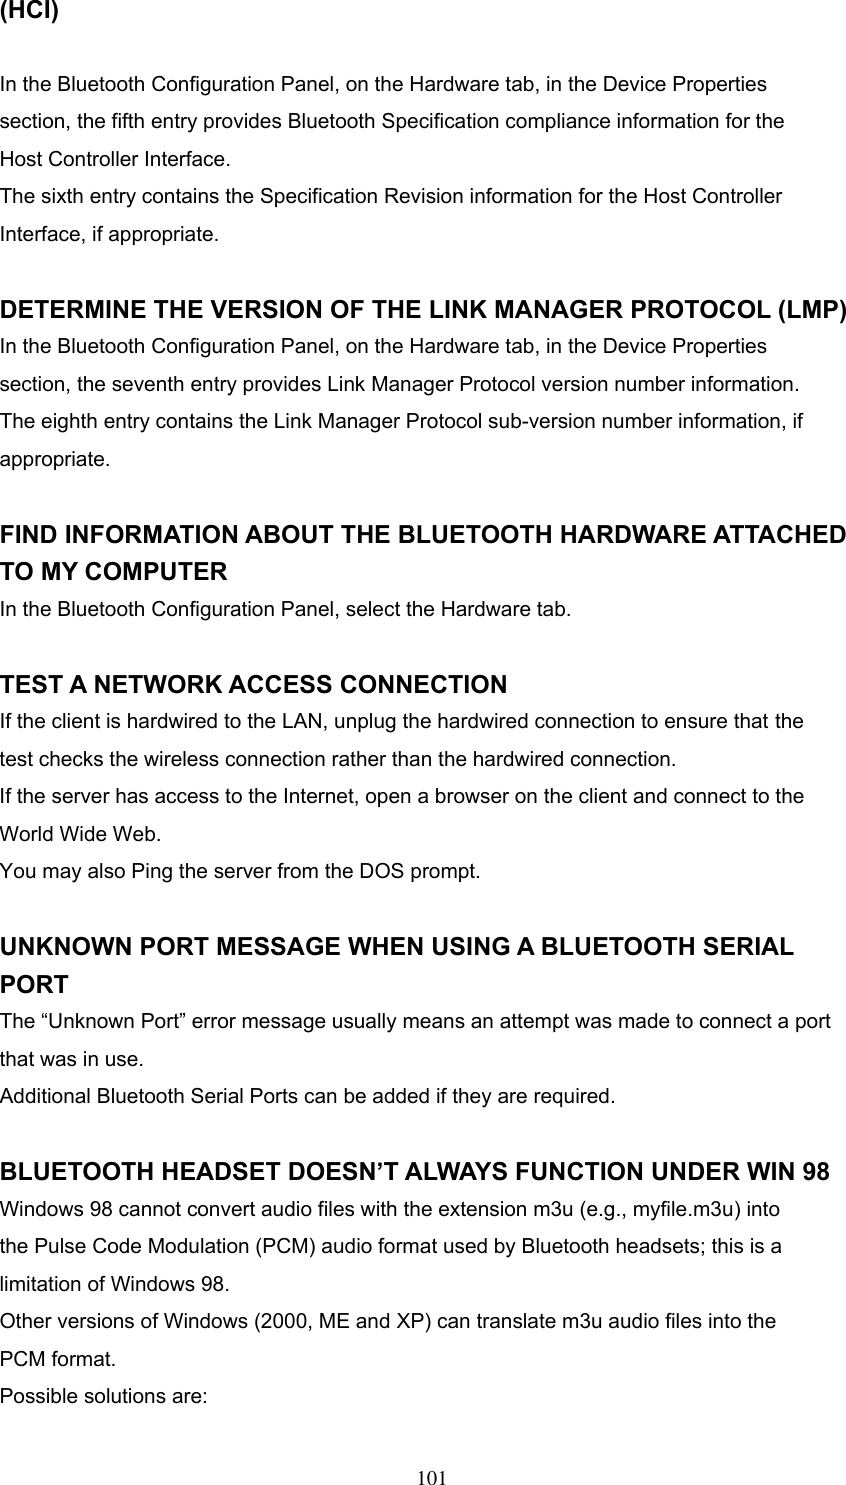 (HCI)  In the Bluetooth Configuration Panel, on the Hardware tab, in the Device Properties section, the fifth entry provides Bluetooth Specification compliance information for the Host Controller Interface. The sixth entry contains the Specification Revision information for the Host Controller Interface, if appropriate.  DETERMINE THE VERSION OF THE LINK MANAGER PROTOCOL (LMP) In the Bluetooth Configuration Panel, on the Hardware tab, in the Device Properties section, the seventh entry provides Link Manager Protocol version number information. The eighth entry contains the Link Manager Protocol sub-version number information, if appropriate.  FIND INFORMATION ABOUT THE BLUETOOTH HARDWARE ATTACHED TO MY COMPUTER In the Bluetooth Configuration Panel, select the Hardware tab.  TEST A NETWORK ACCESS CONNECTION If the client is hardwired to the LAN, unplug the hardwired connection to ensure that the test checks the wireless connection rather than the hardwired connection. If the server has access to the Internet, open a browser on the client and connect to the World Wide Web. You may also Ping the server from the DOS prompt.  UNKNOWN PORT MESSAGE WHEN USING A BLUETOOTH SERIAL PORT The “Unknown Port” error message usually means an attempt was made to connect a port that was in use. Additional Bluetooth Serial Ports can be added if they are required.  BLUETOOTH HEADSET DOESN’T ALWAYS FUNCTION UNDER WIN 98 Windows 98 cannot convert audio files with the extension m3u (e.g., myfile.m3u) into the Pulse Code Modulation (PCM) audio format used by Bluetooth headsets; this is a limitation of Windows 98. Other versions of Windows (2000, ME and XP) can translate m3u audio files into the PCM format. Possible solutions are:  101 